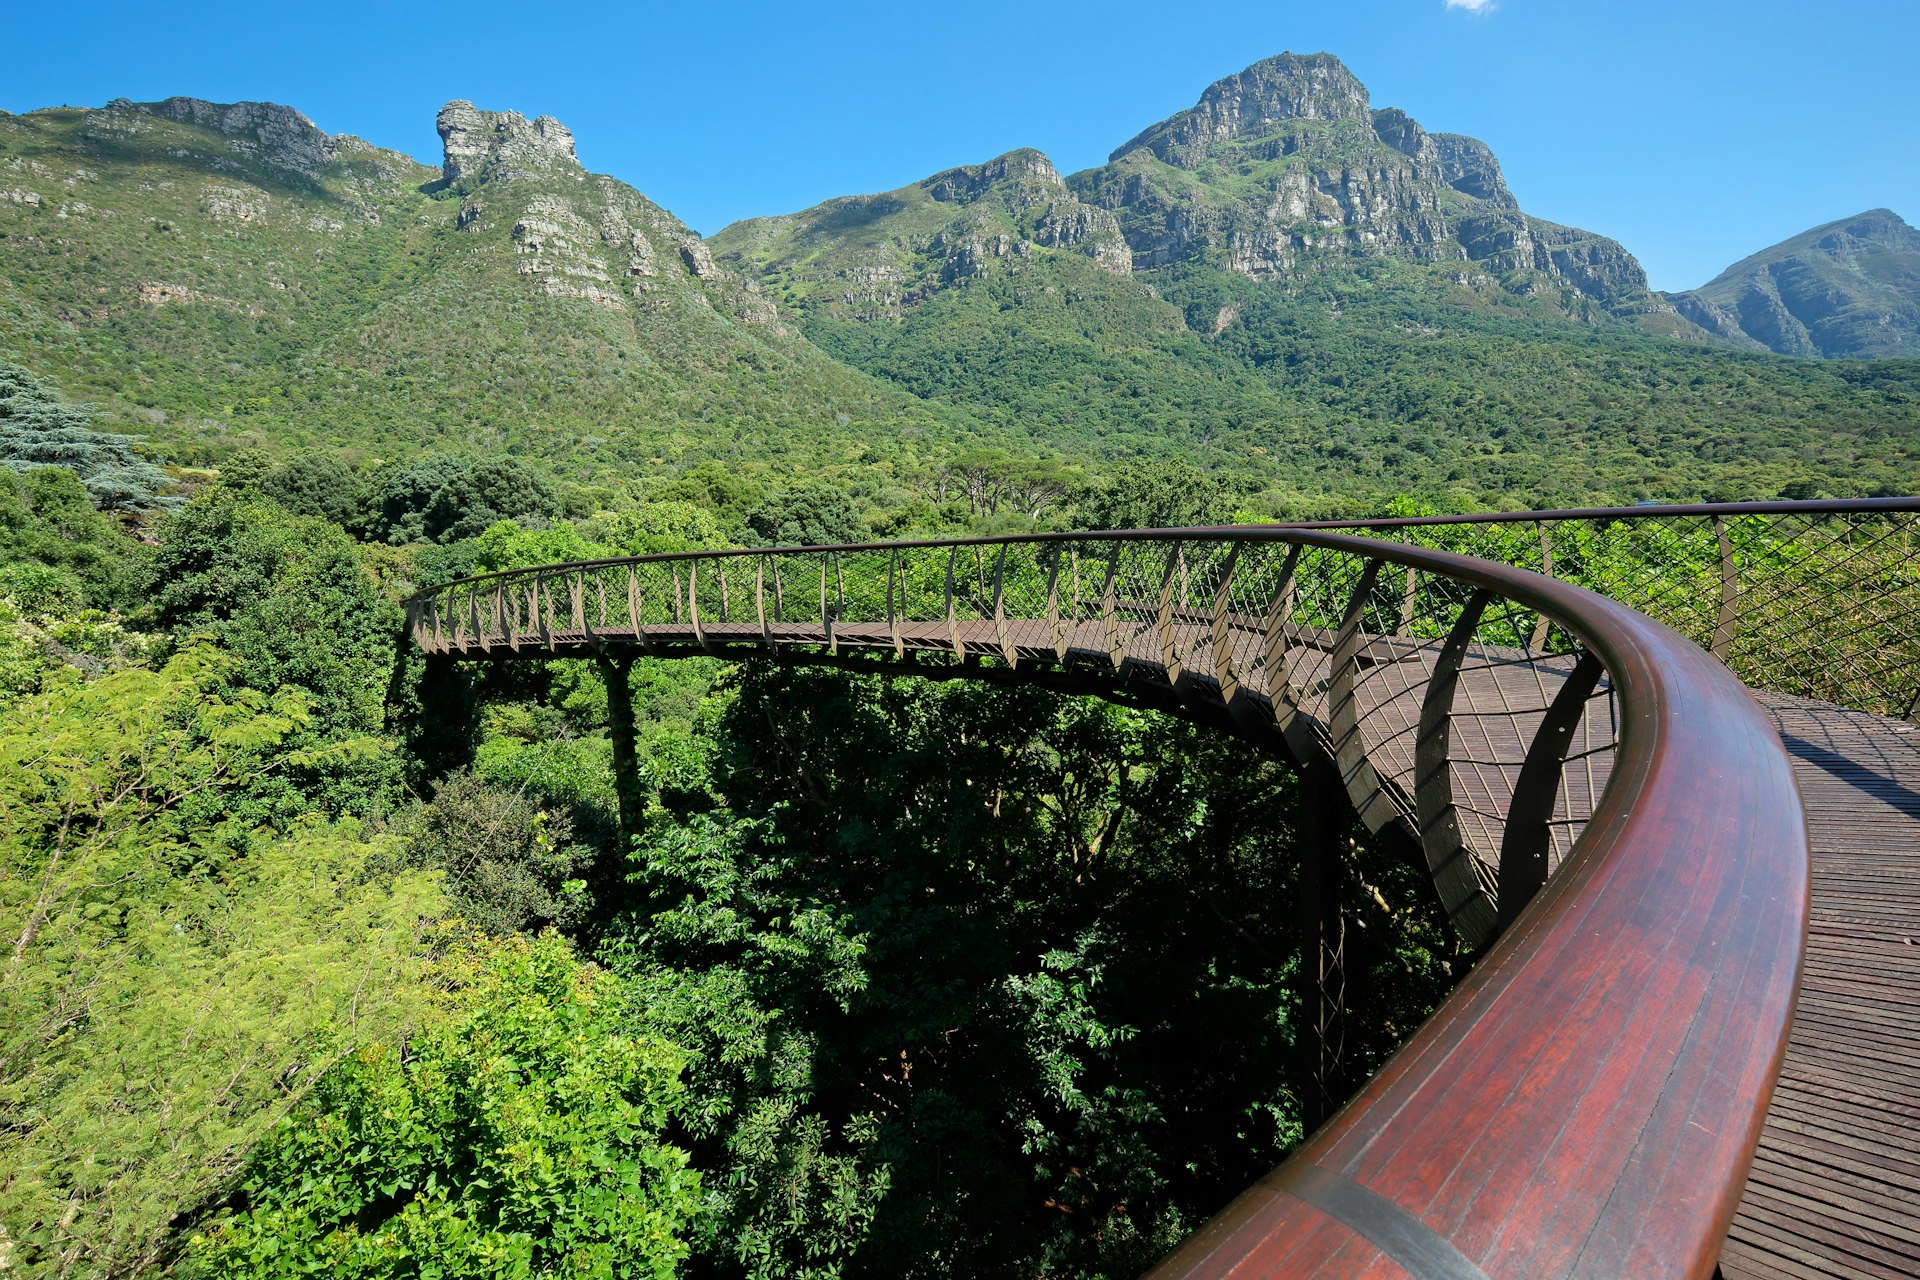 A curving wooden walkway sweeps through the landscape above the botanical garden; Table Mountain makes a stunning backdrop.